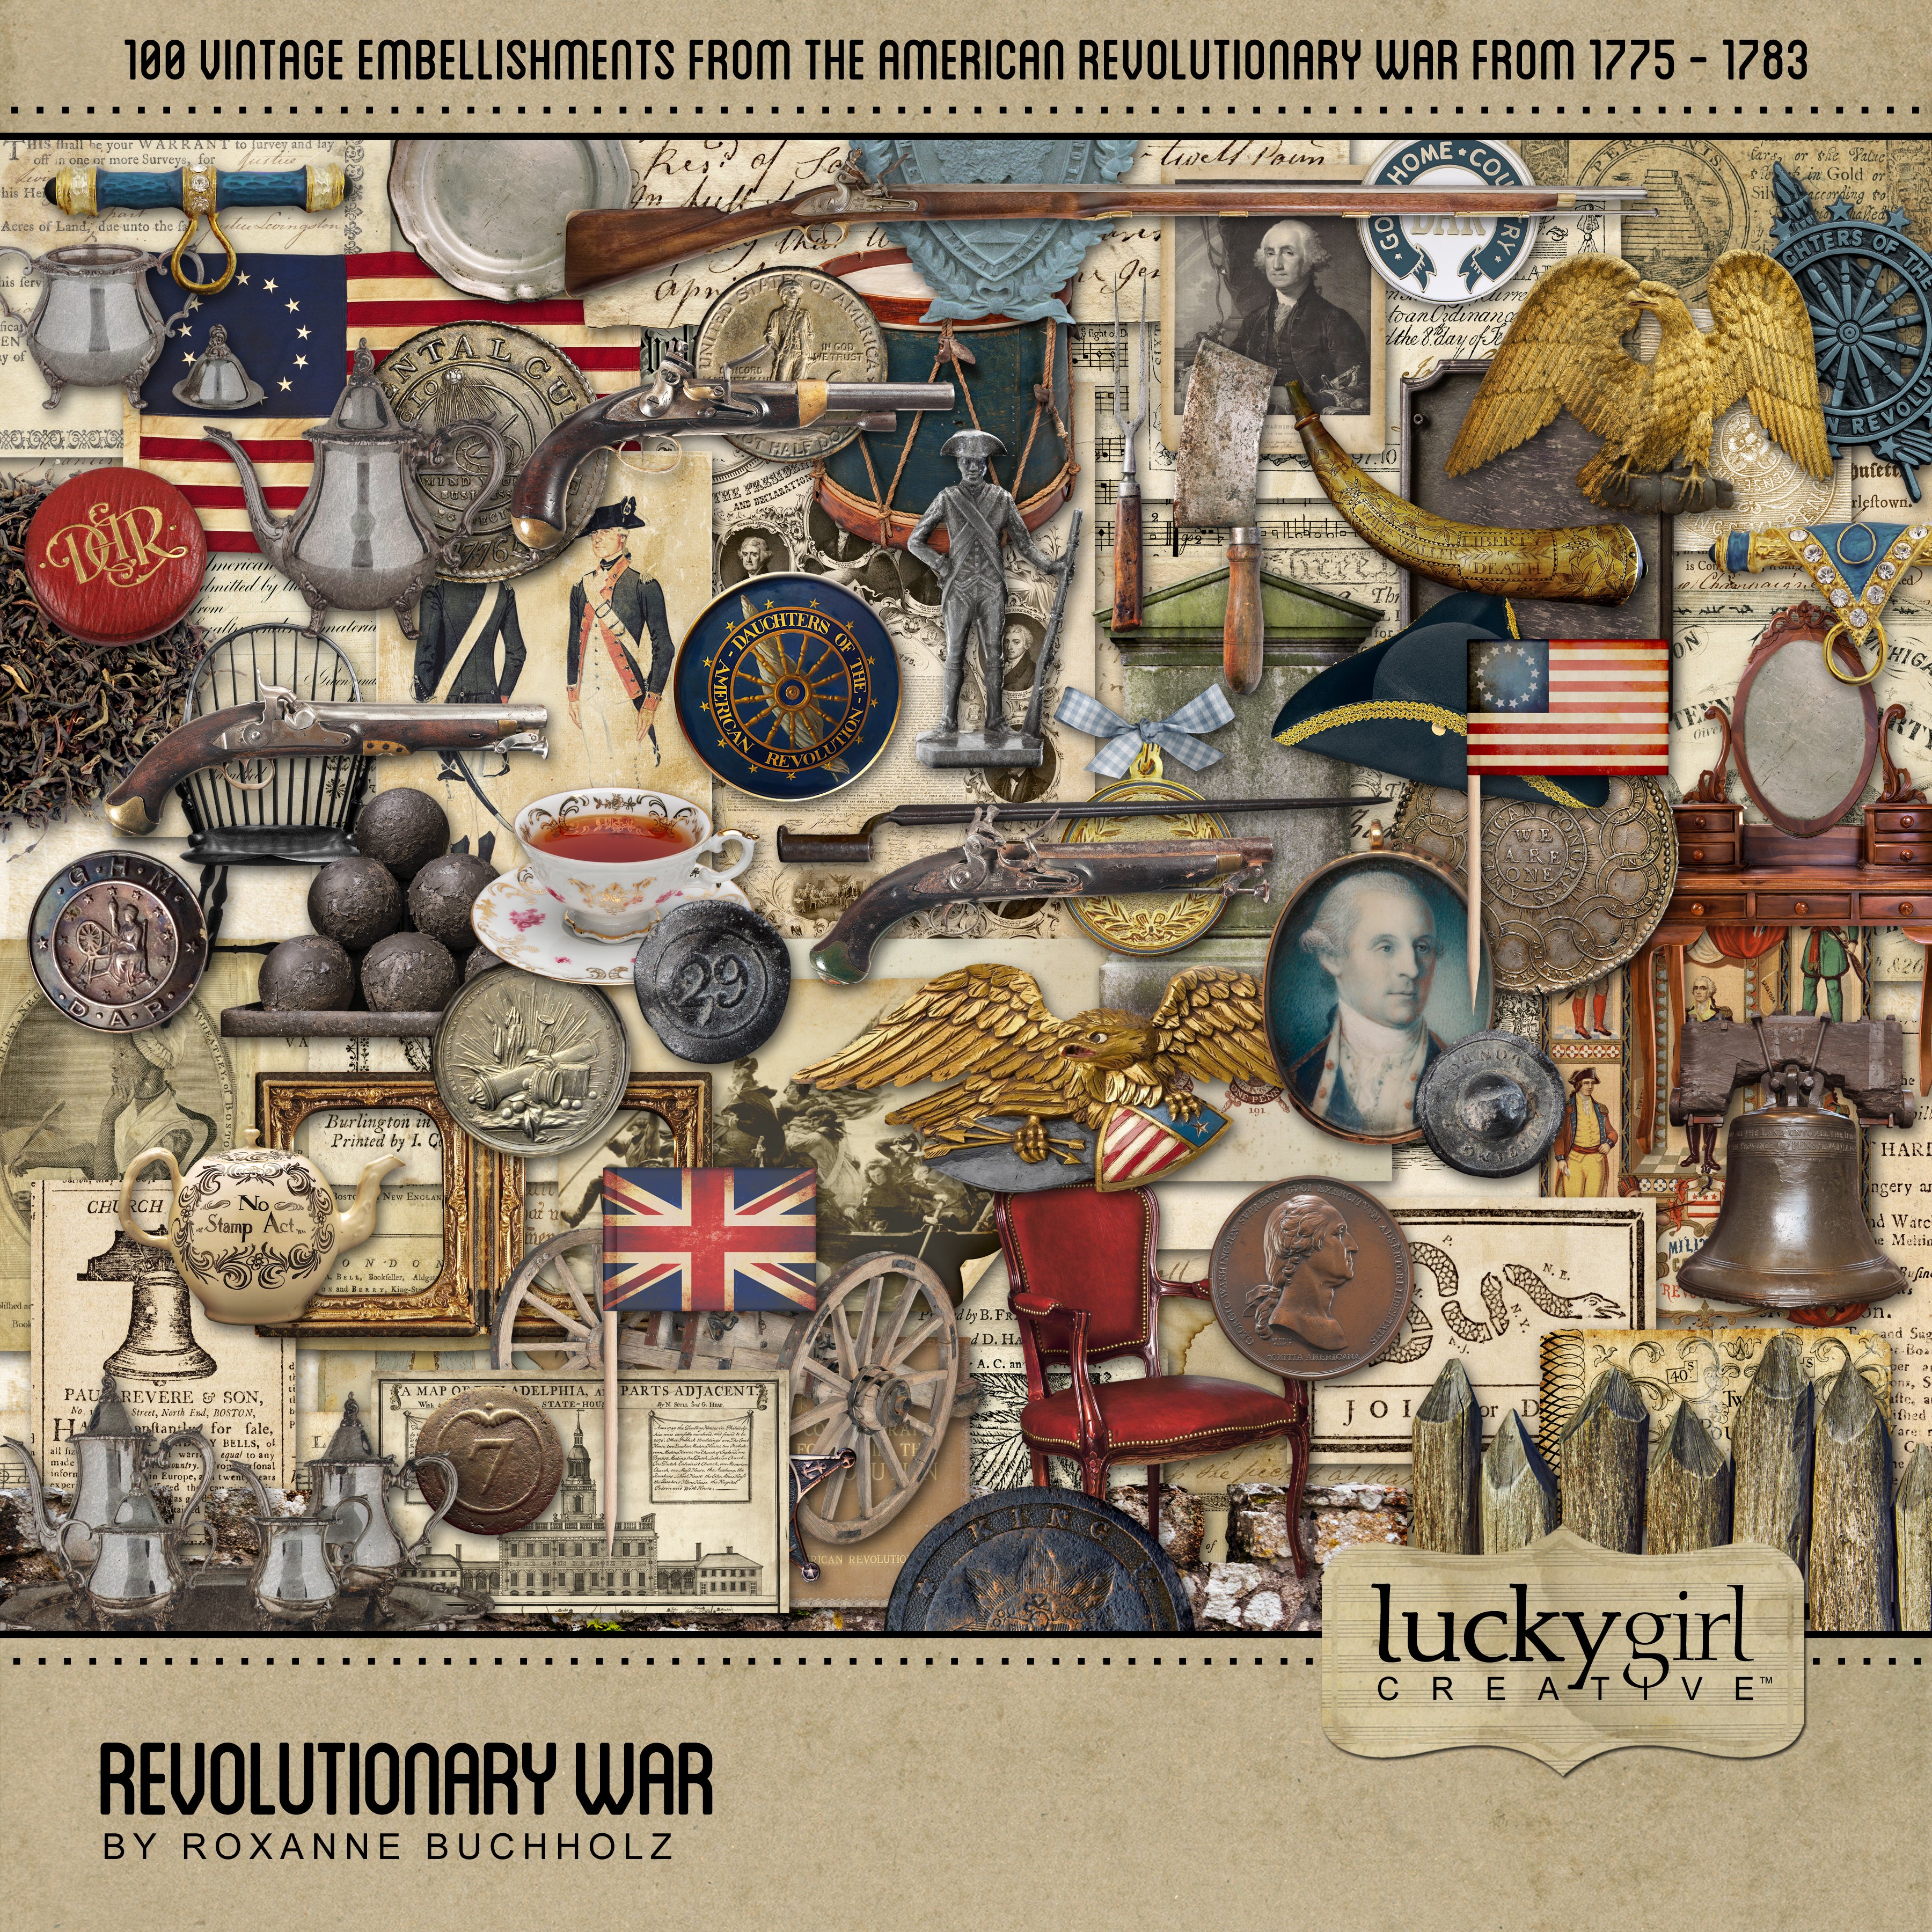 Extensively researched, this American Revolutionary War Digital Scrapbook Kit is filled with antique historic digital art embellishments for family genealogy projects. It showcases 1775 - 1783 when the 13 American colonies fought Great Britain for their freedom.